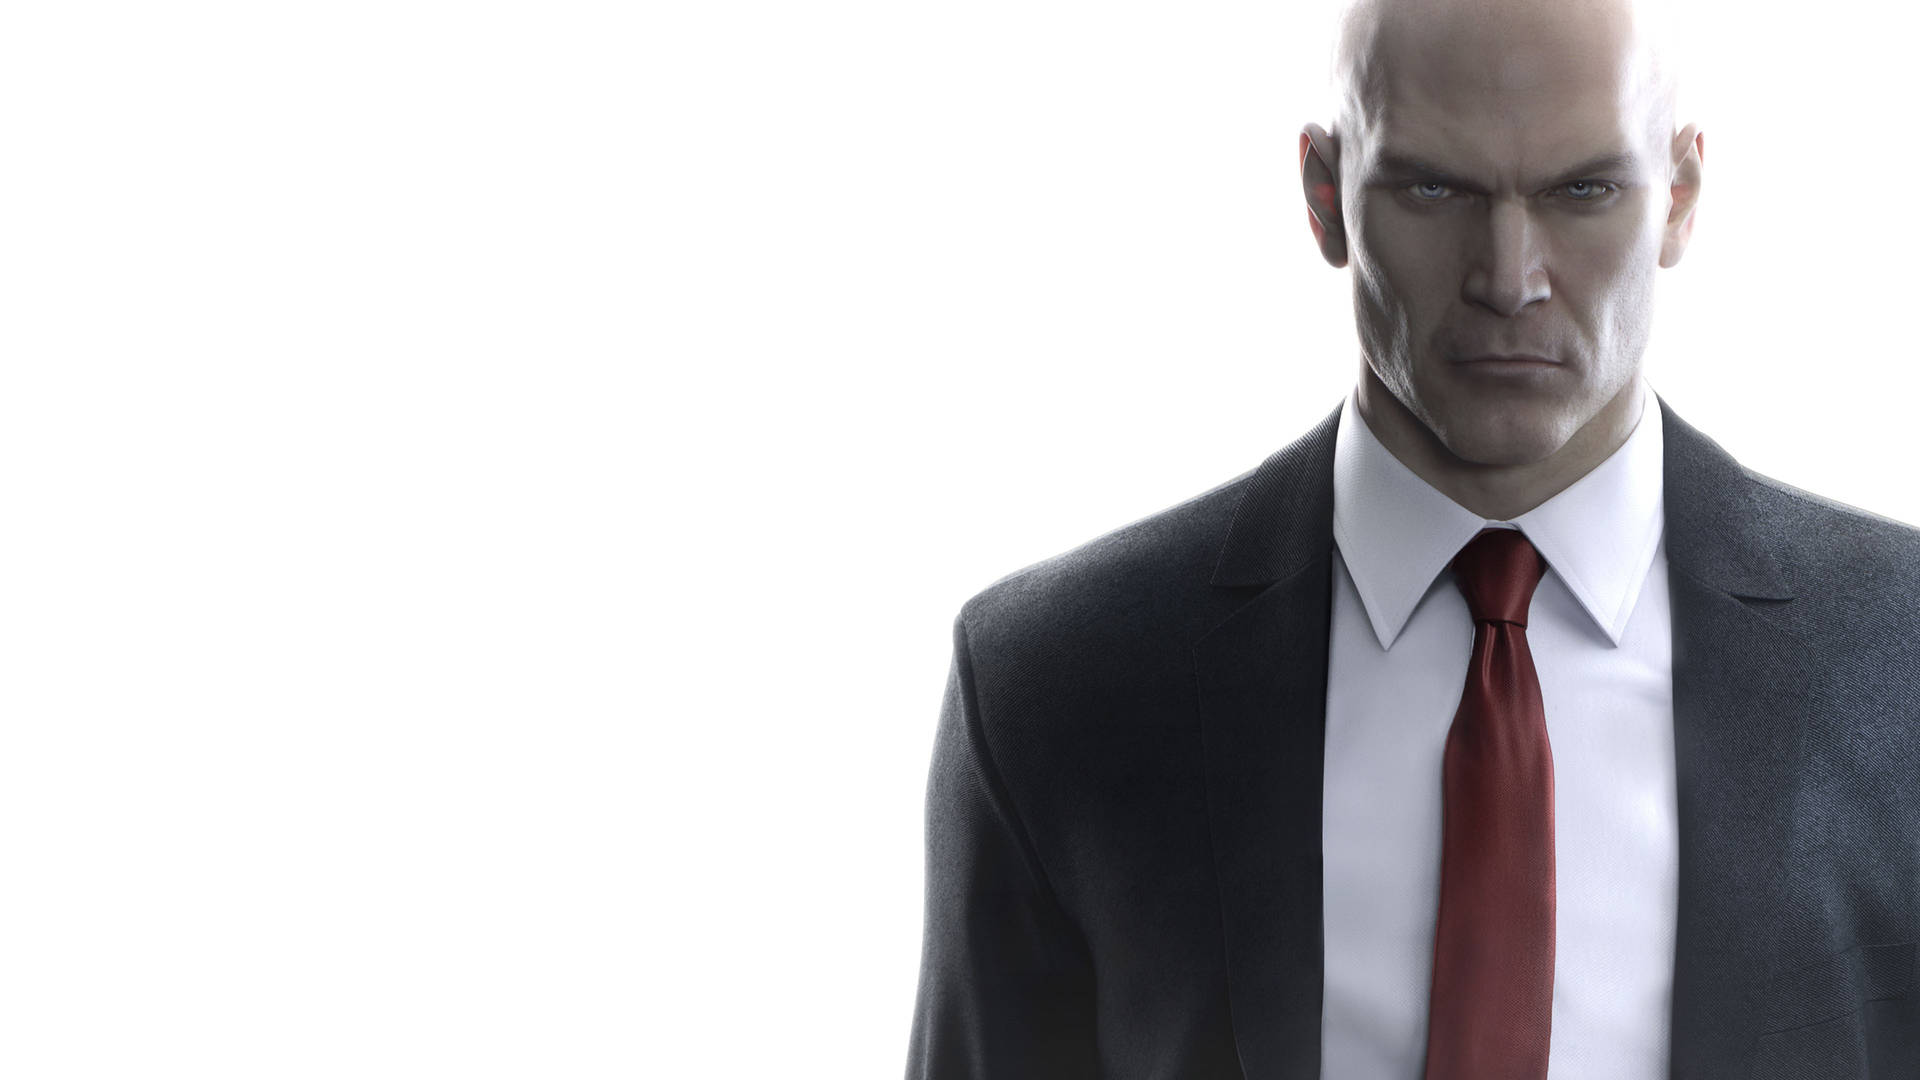 Hitman With Serious Expression Wallpaper